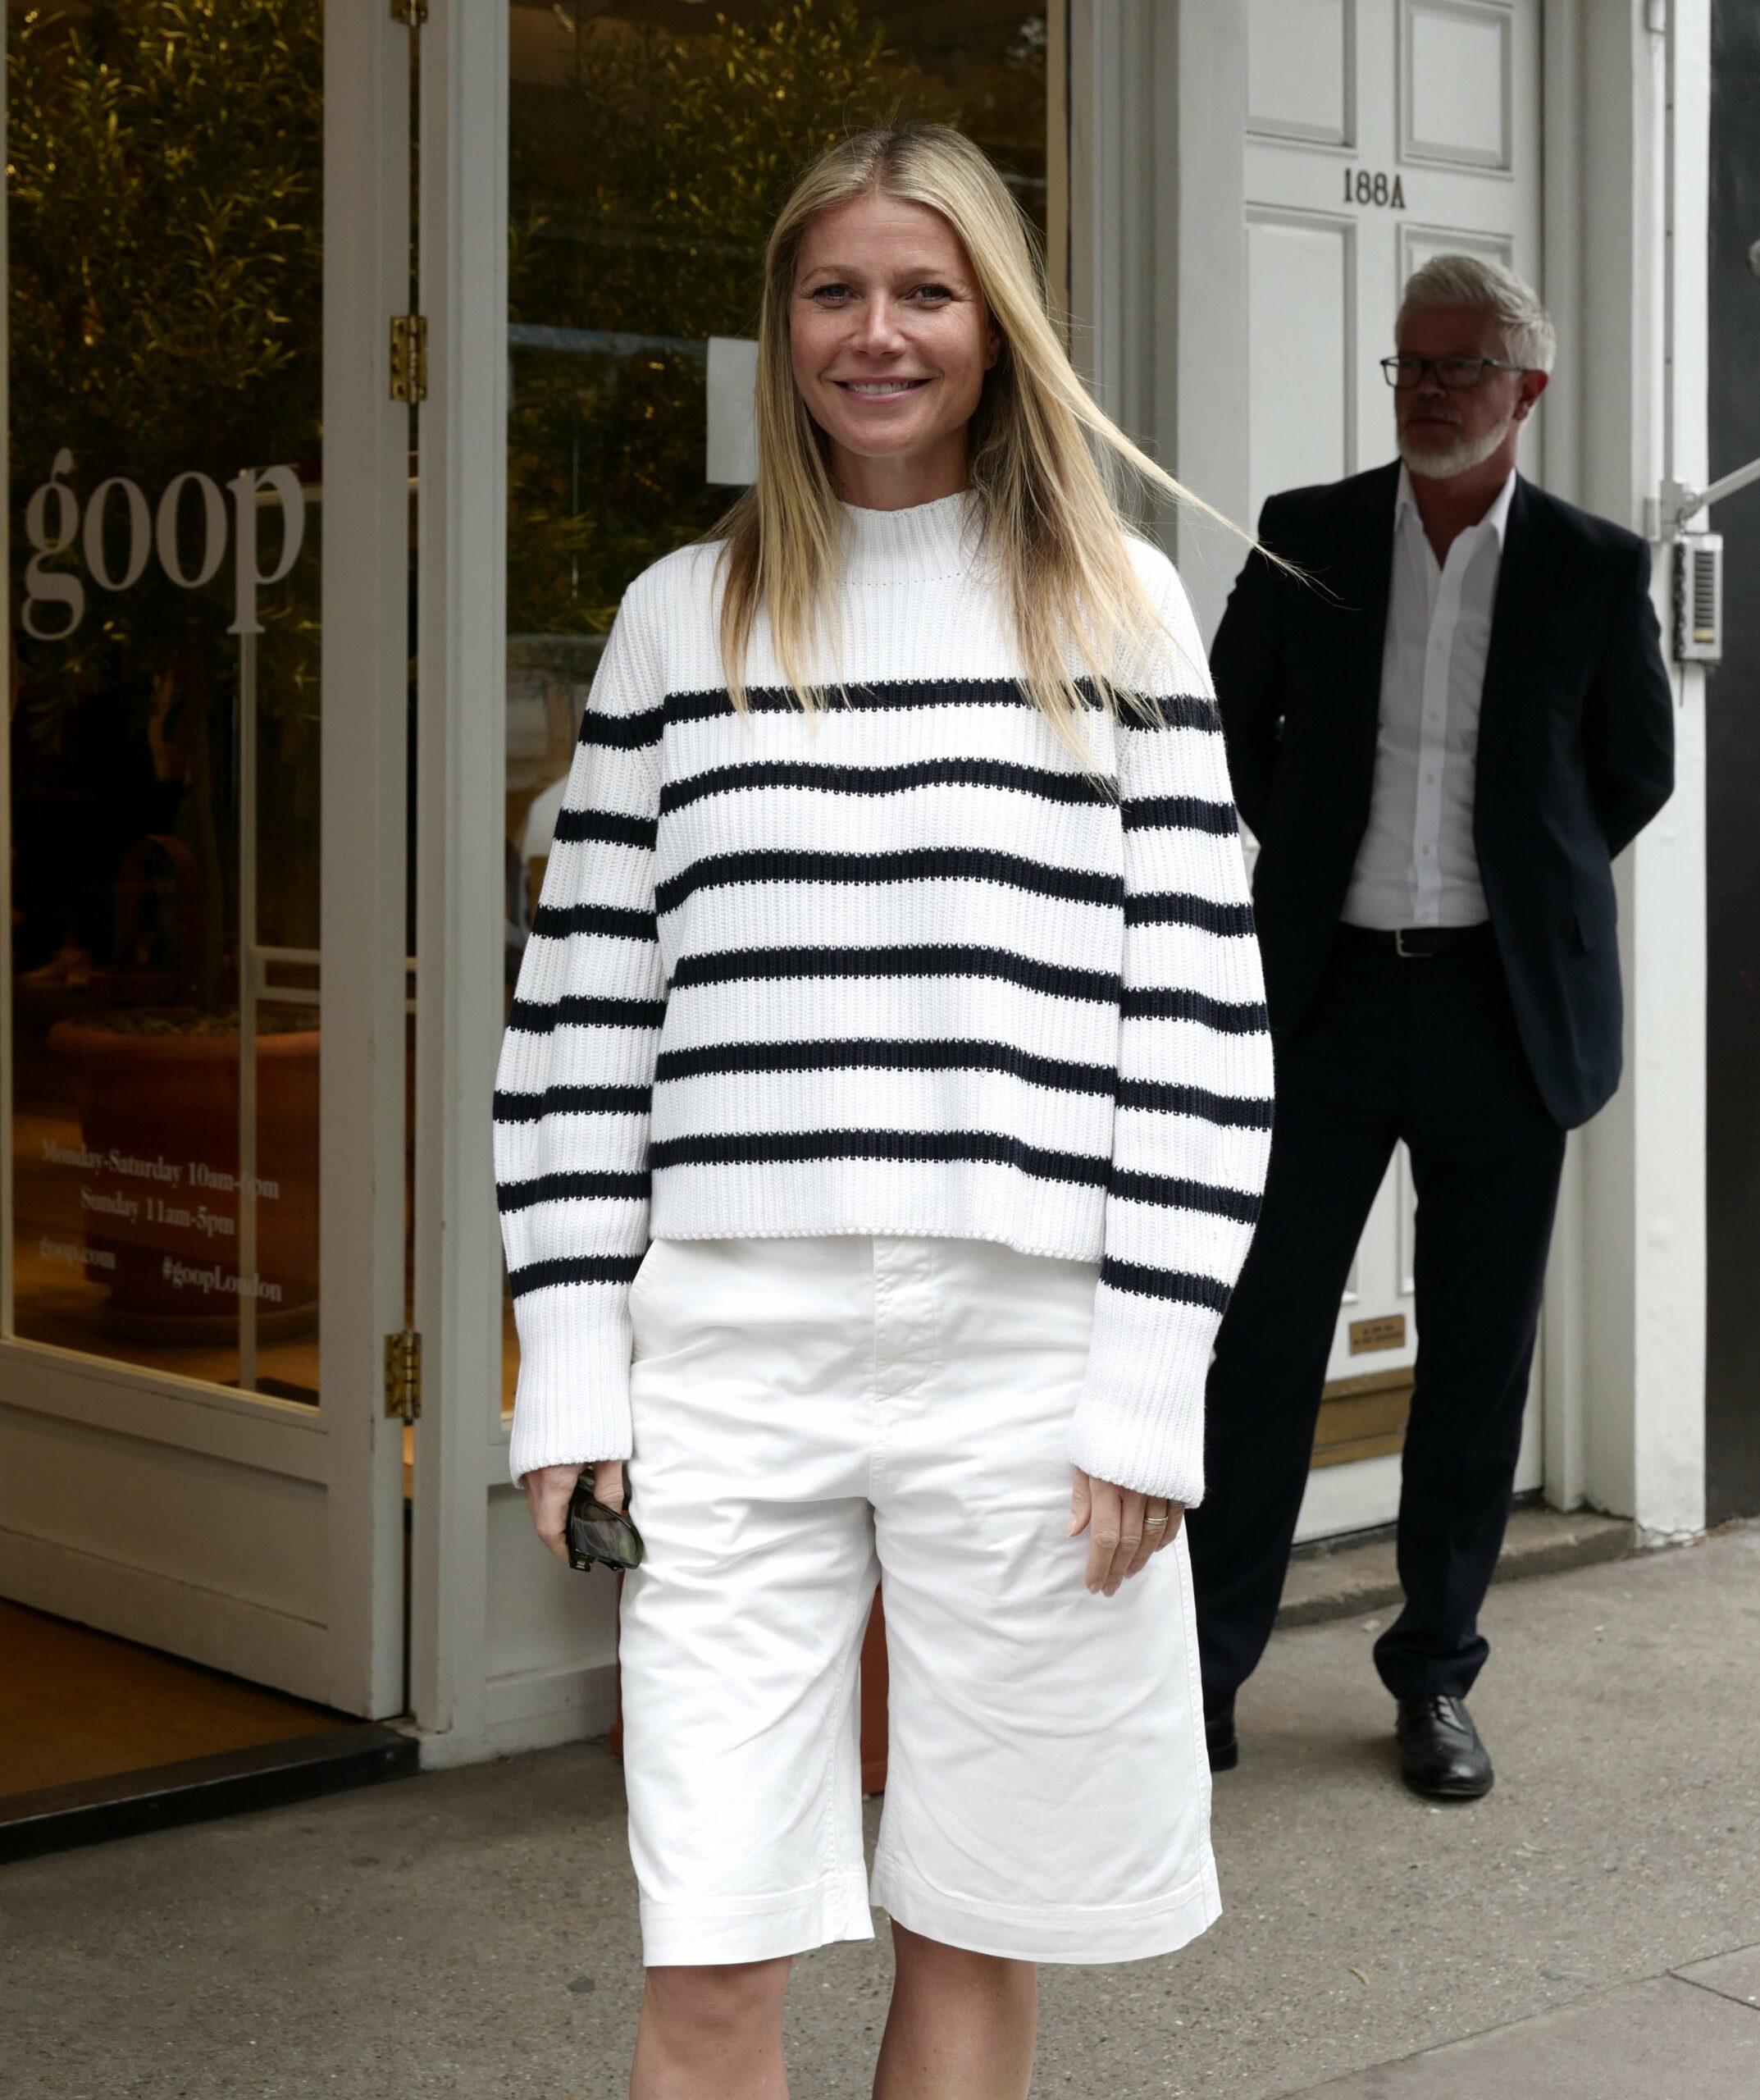 Gwyneth Paltrow Talks Body Changes And Birth Of Daughter Apple: 'We Almost Died'